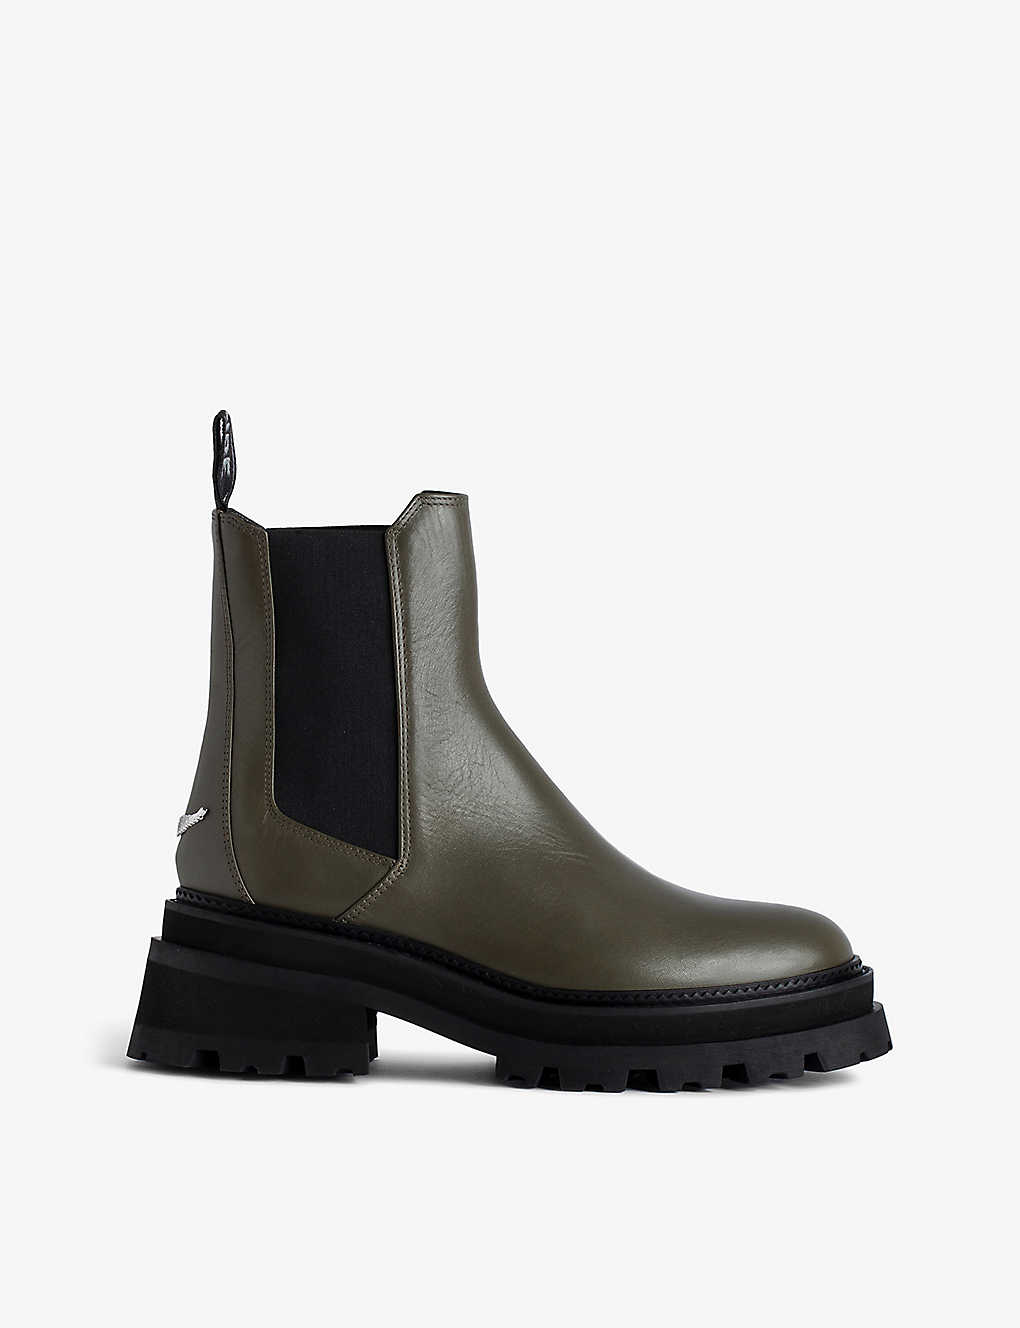 ZADIG & VOLTAIRE ZADIG&VOLTAIRE WOMENS MILITARY RIDE LOGO-PLAQUE LEATHER CHELSEA BOOTS